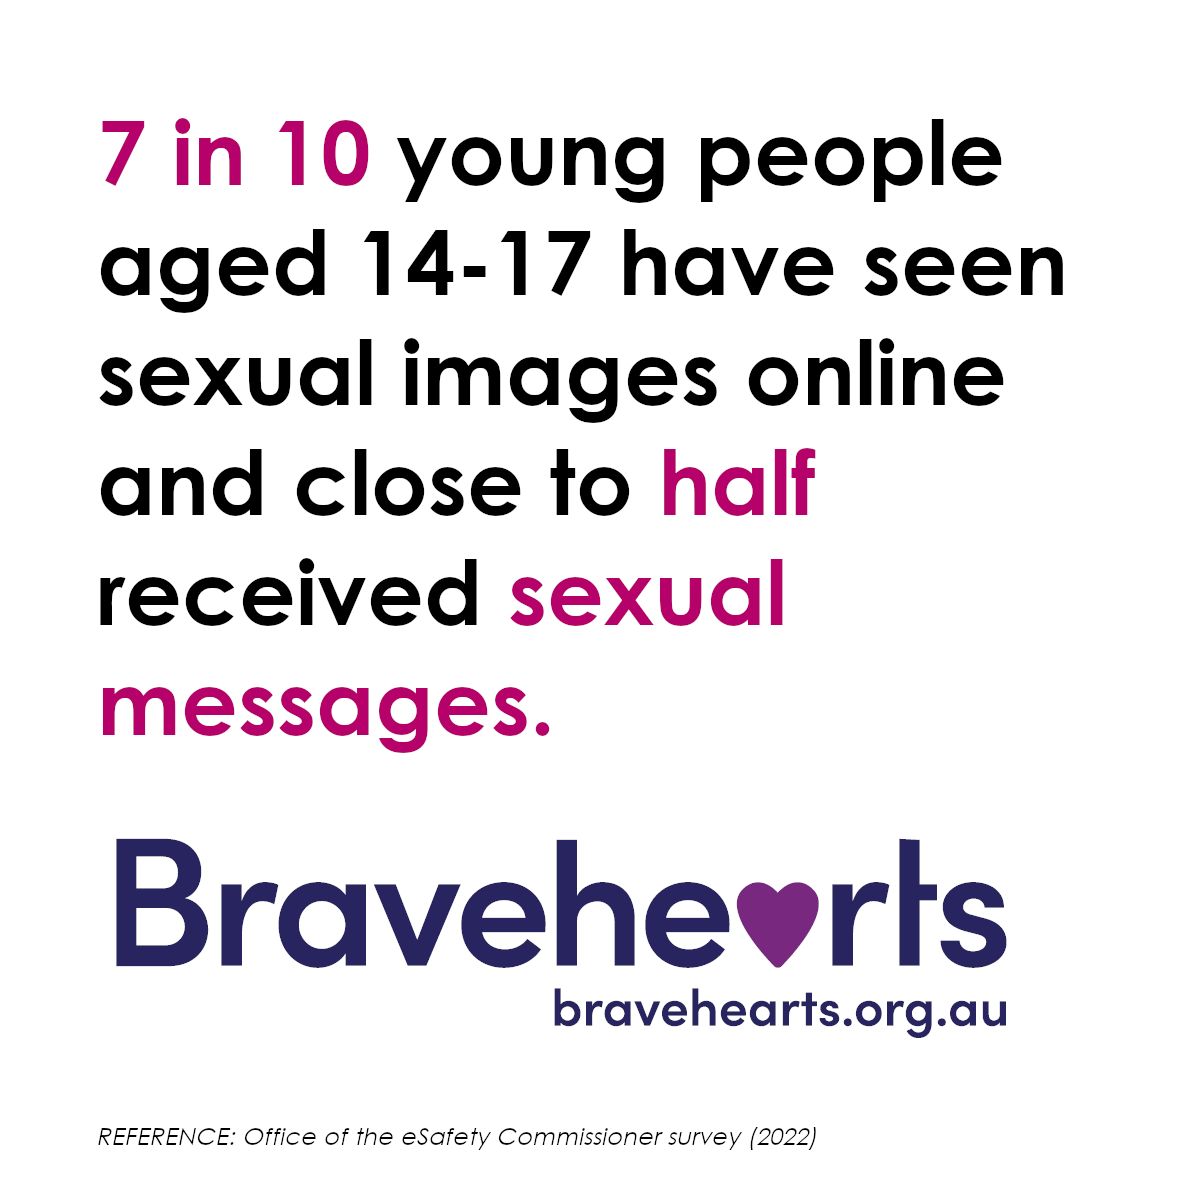 For more information on online child exploitation see our page: bravehearts.org.au/about-child-se… #ProtectKids #eSafety #OnlineSafety